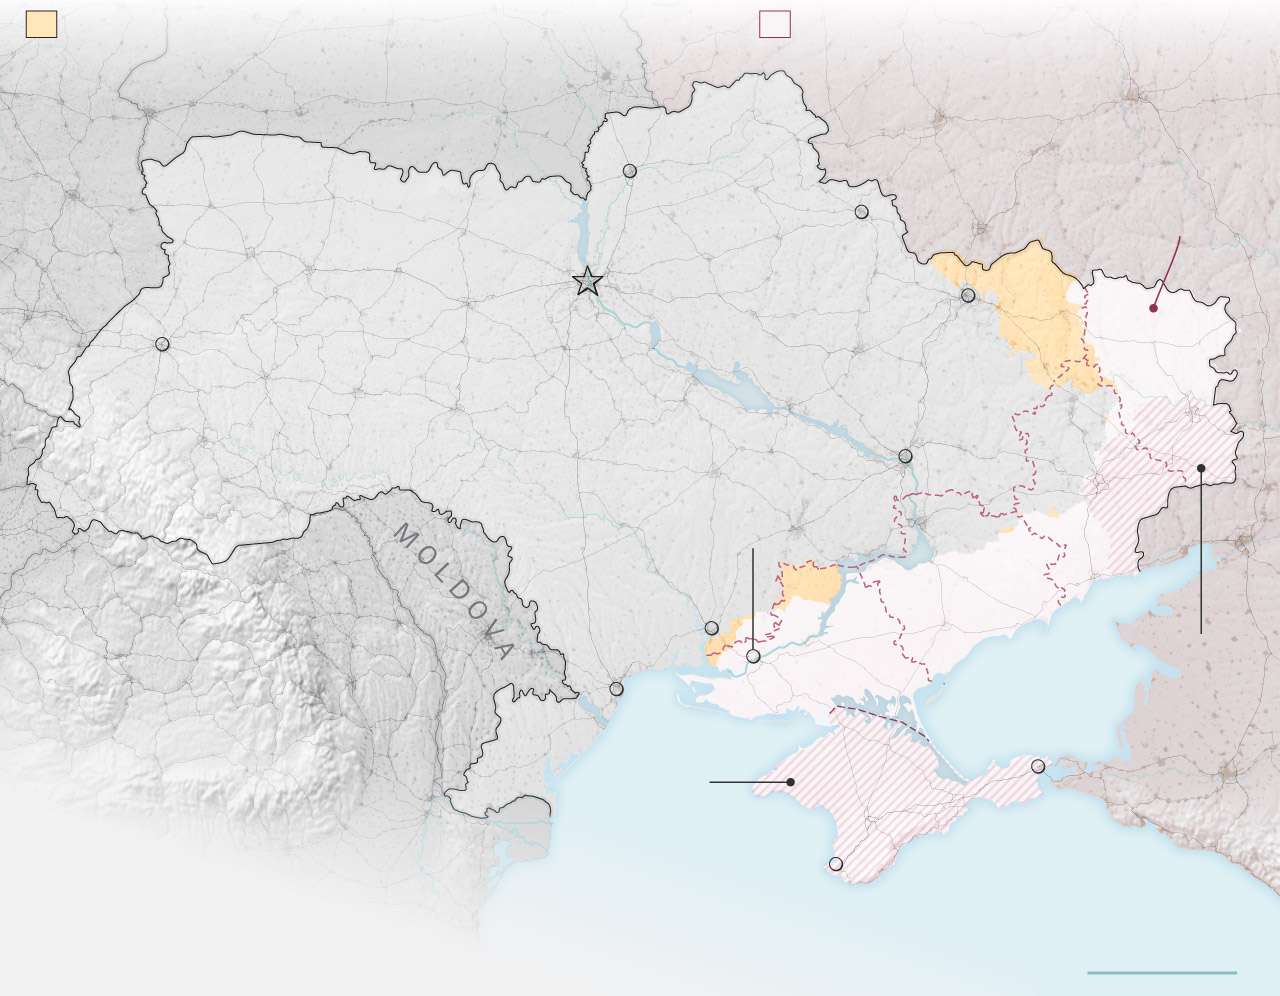 Why Putin will fight for Kherson: Fresh water and land bridge to Crimea